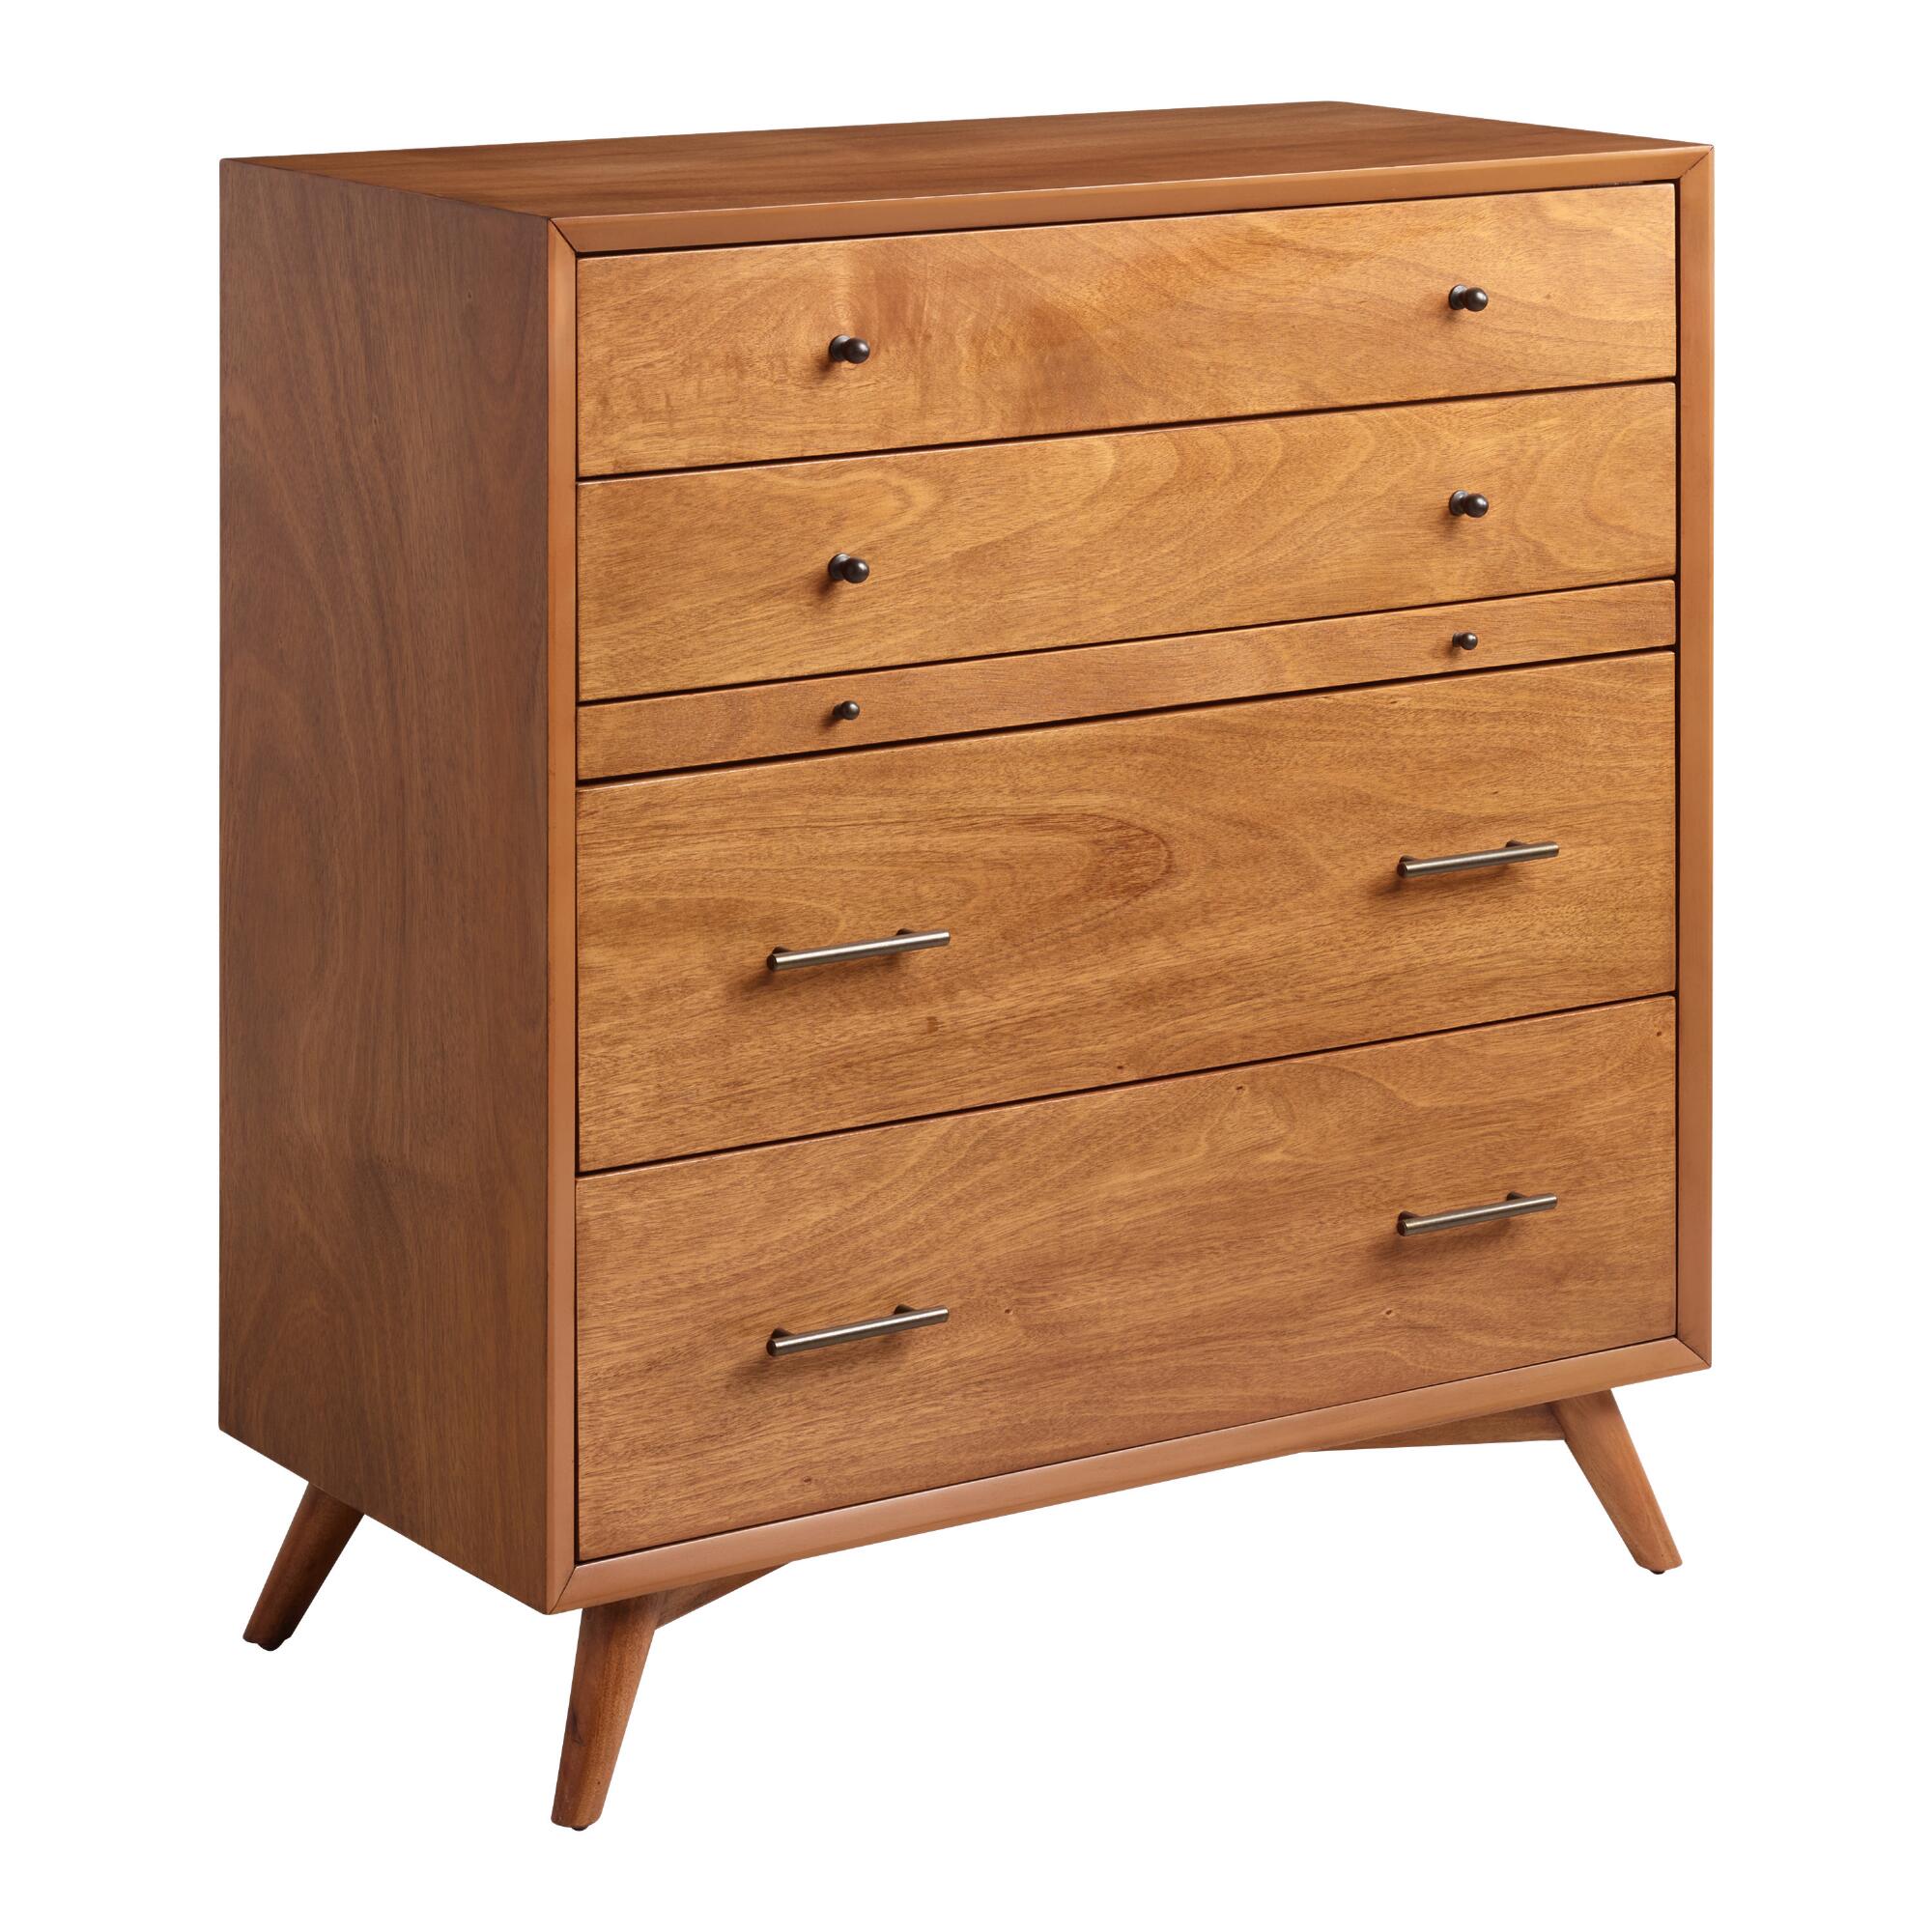 Acorn Wood Brewton Dresser with Pullout Tray: Brown by World Market